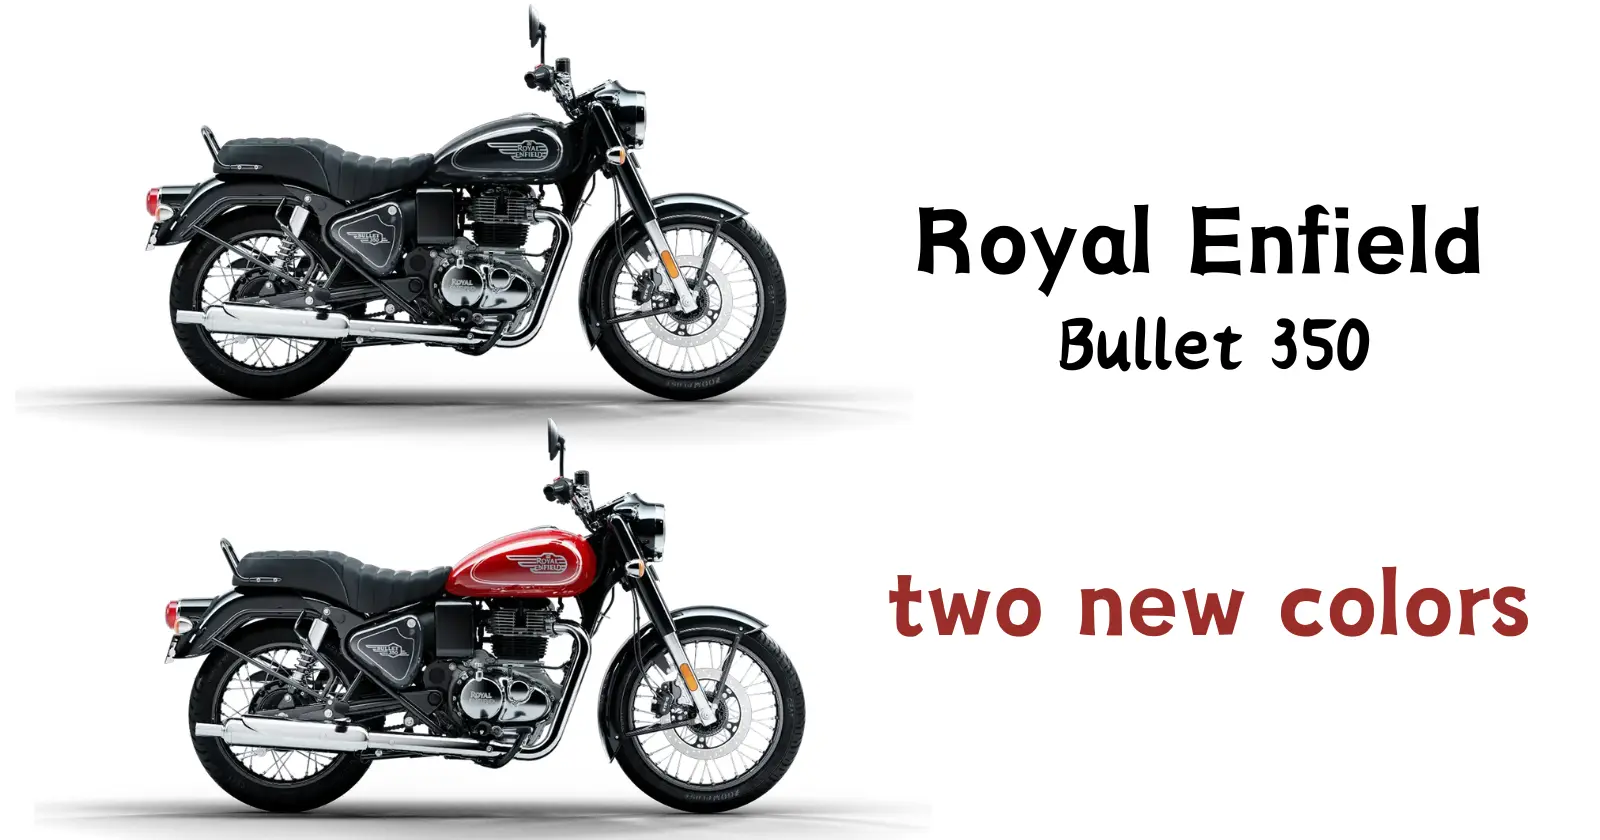 Royal Enfield has introduced two new colors in the Military Silver Edition for its Bullet 350